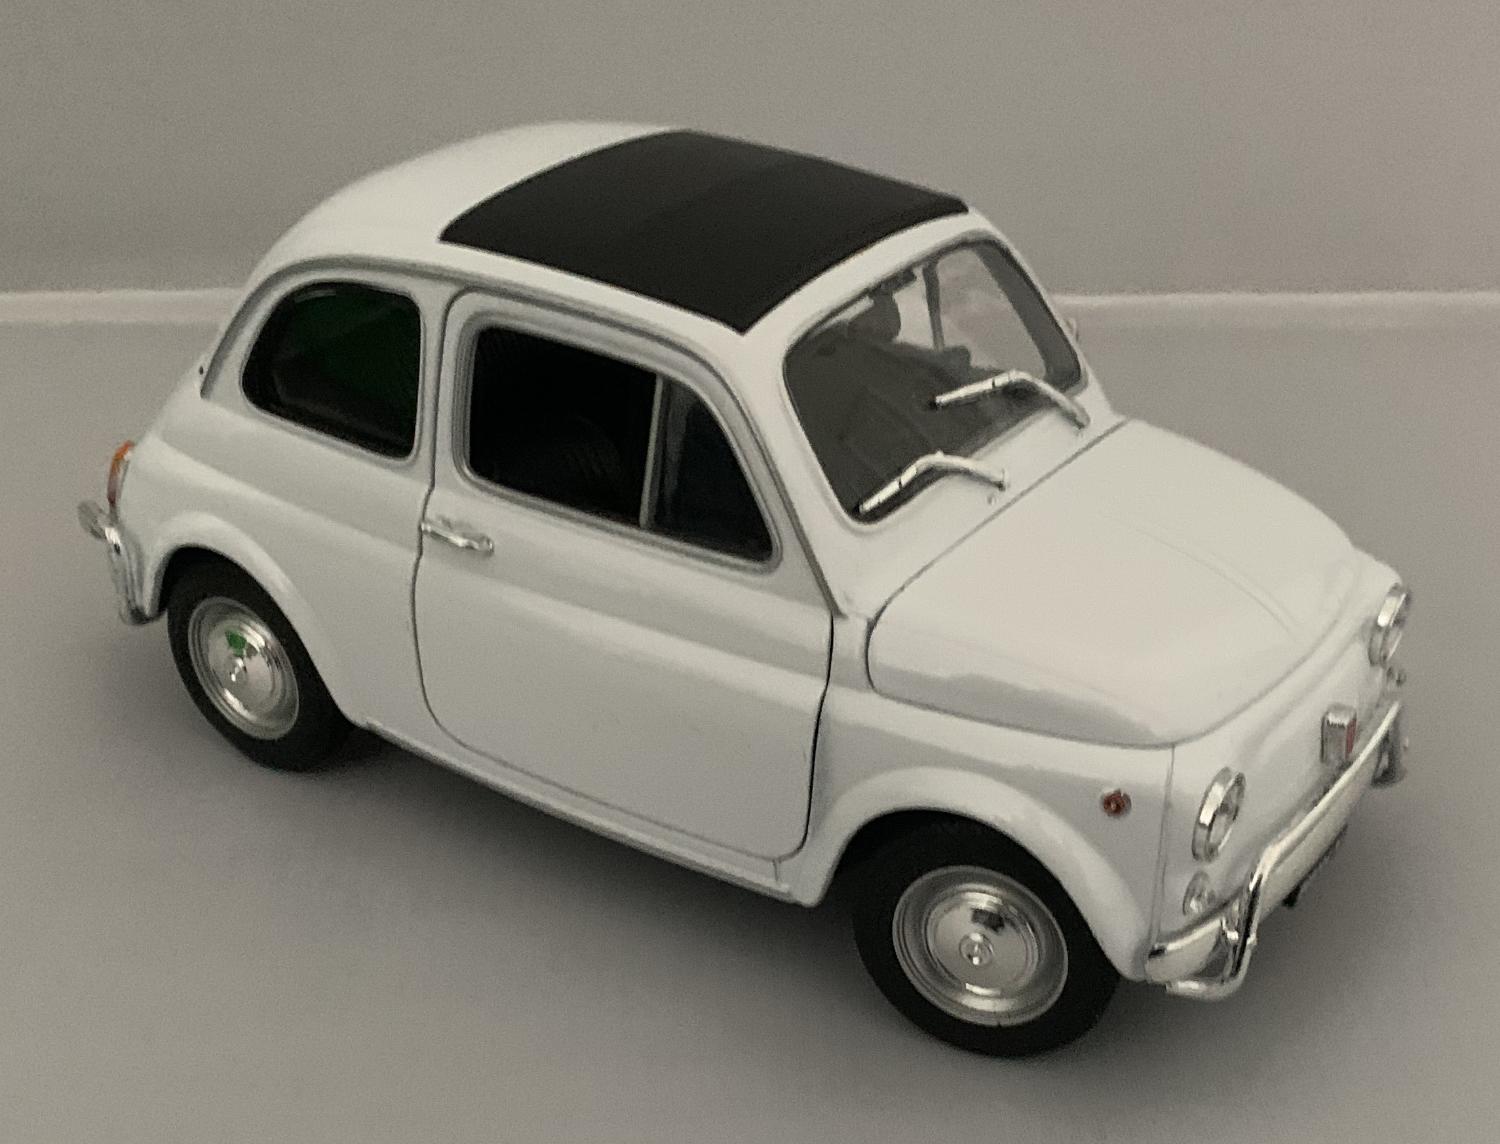 An excellent scale model of the Fiat 500 Nuova with high level of detail throughout, all authentically recreated. Model is presented in a window display box.